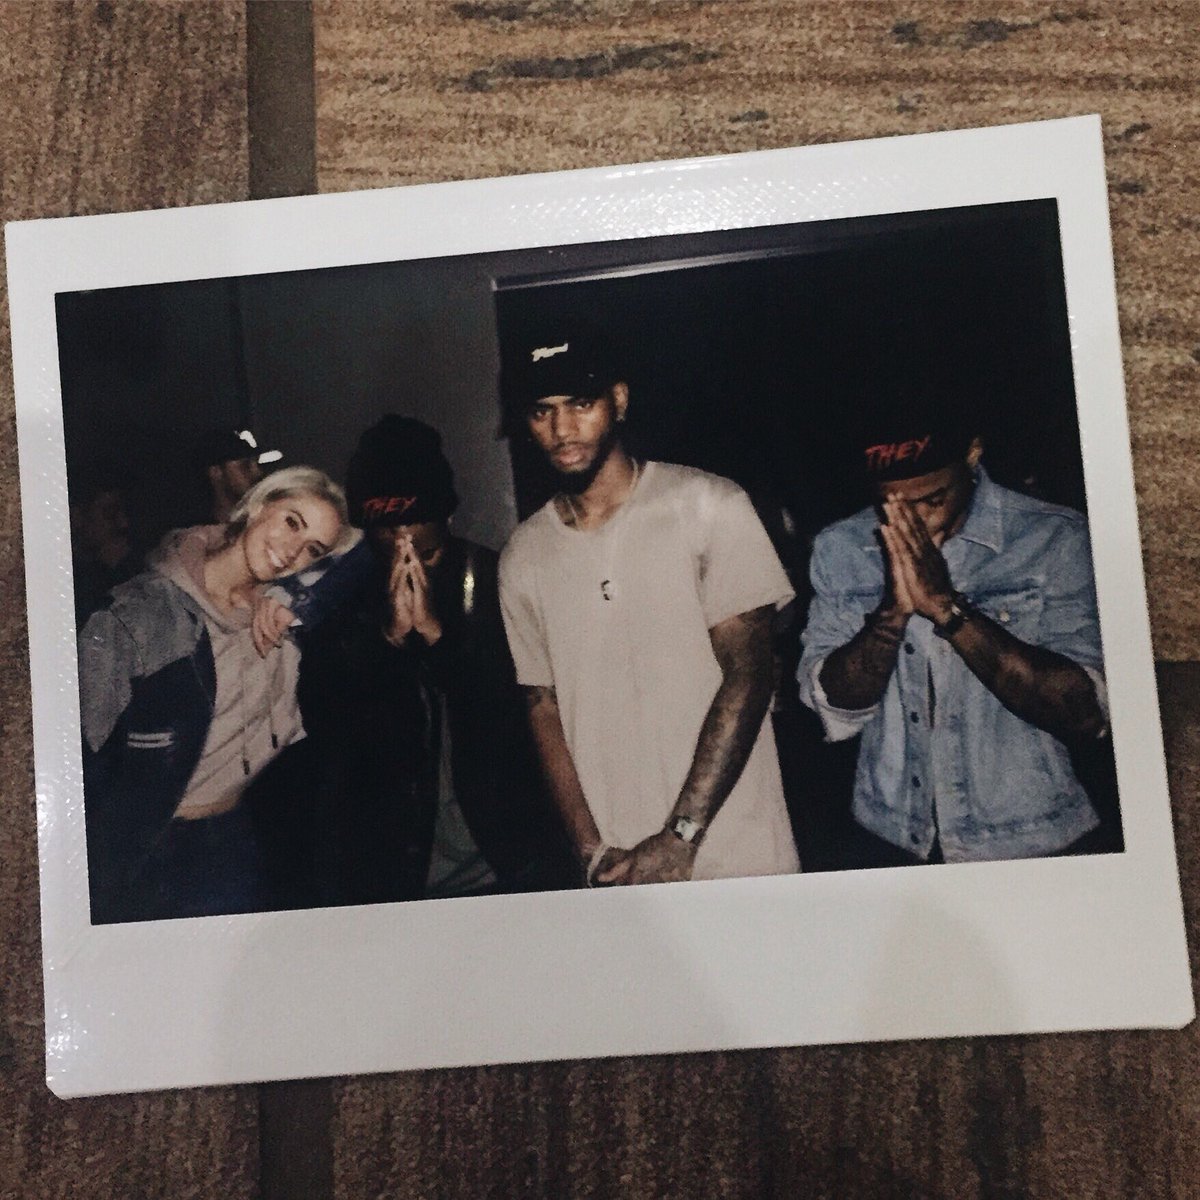 RT @unofficialTHEY: Nothing like kicking it with genuine people . @brysontiller @YesJulz https://t.co/iV6EpGK3b5